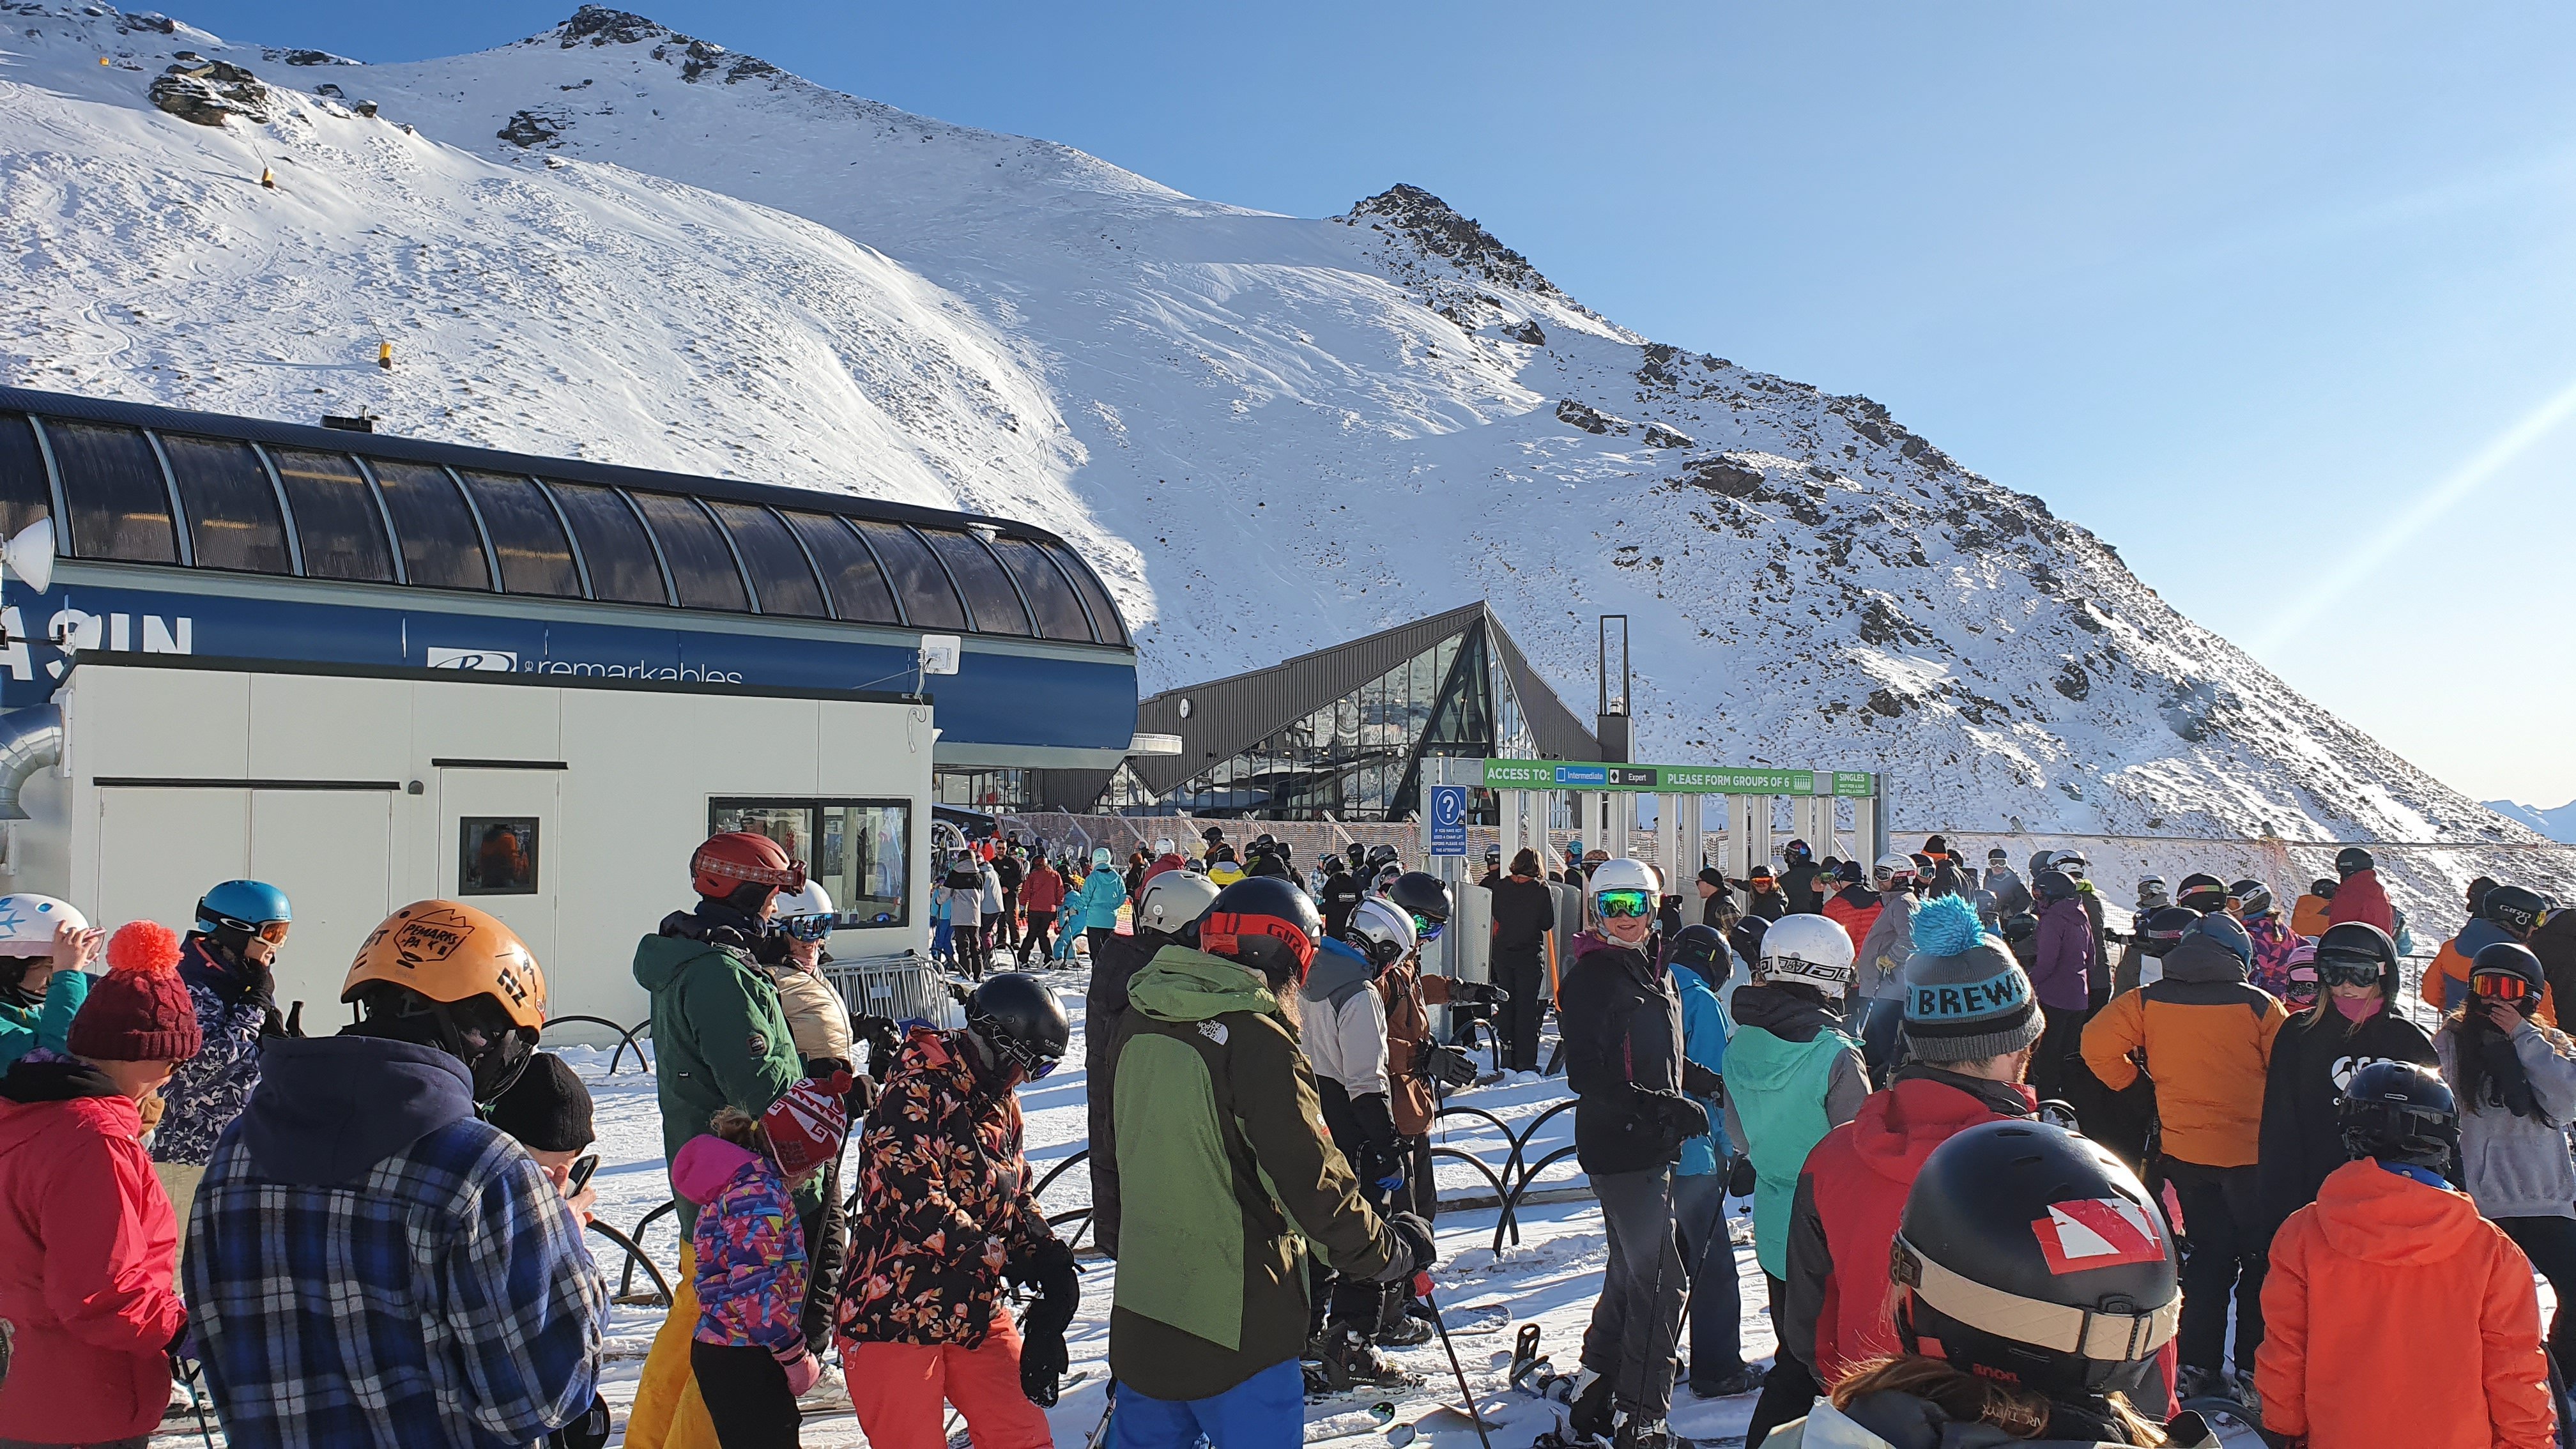 A busy day at The Remarkables during the school holidays. All four of the major ski areas in...